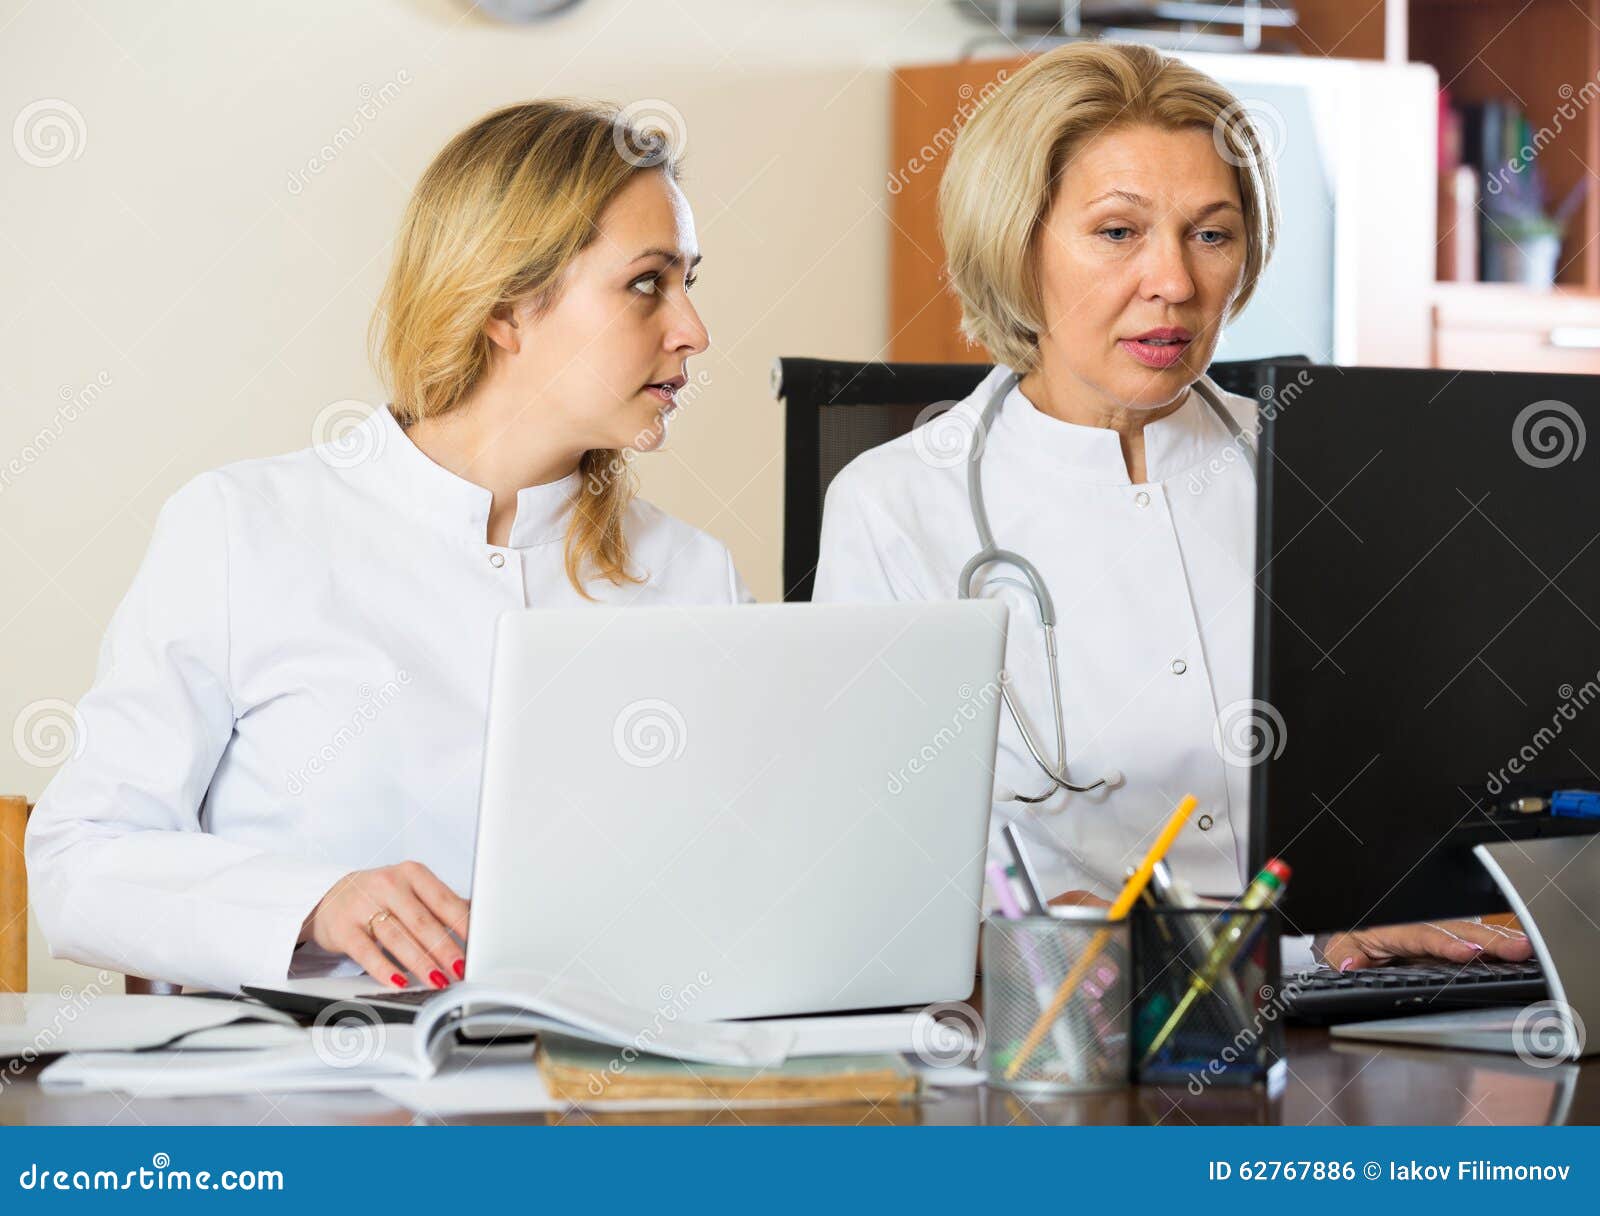 Two female doctors working together. Two female professional doctors with stethoscope working in office together